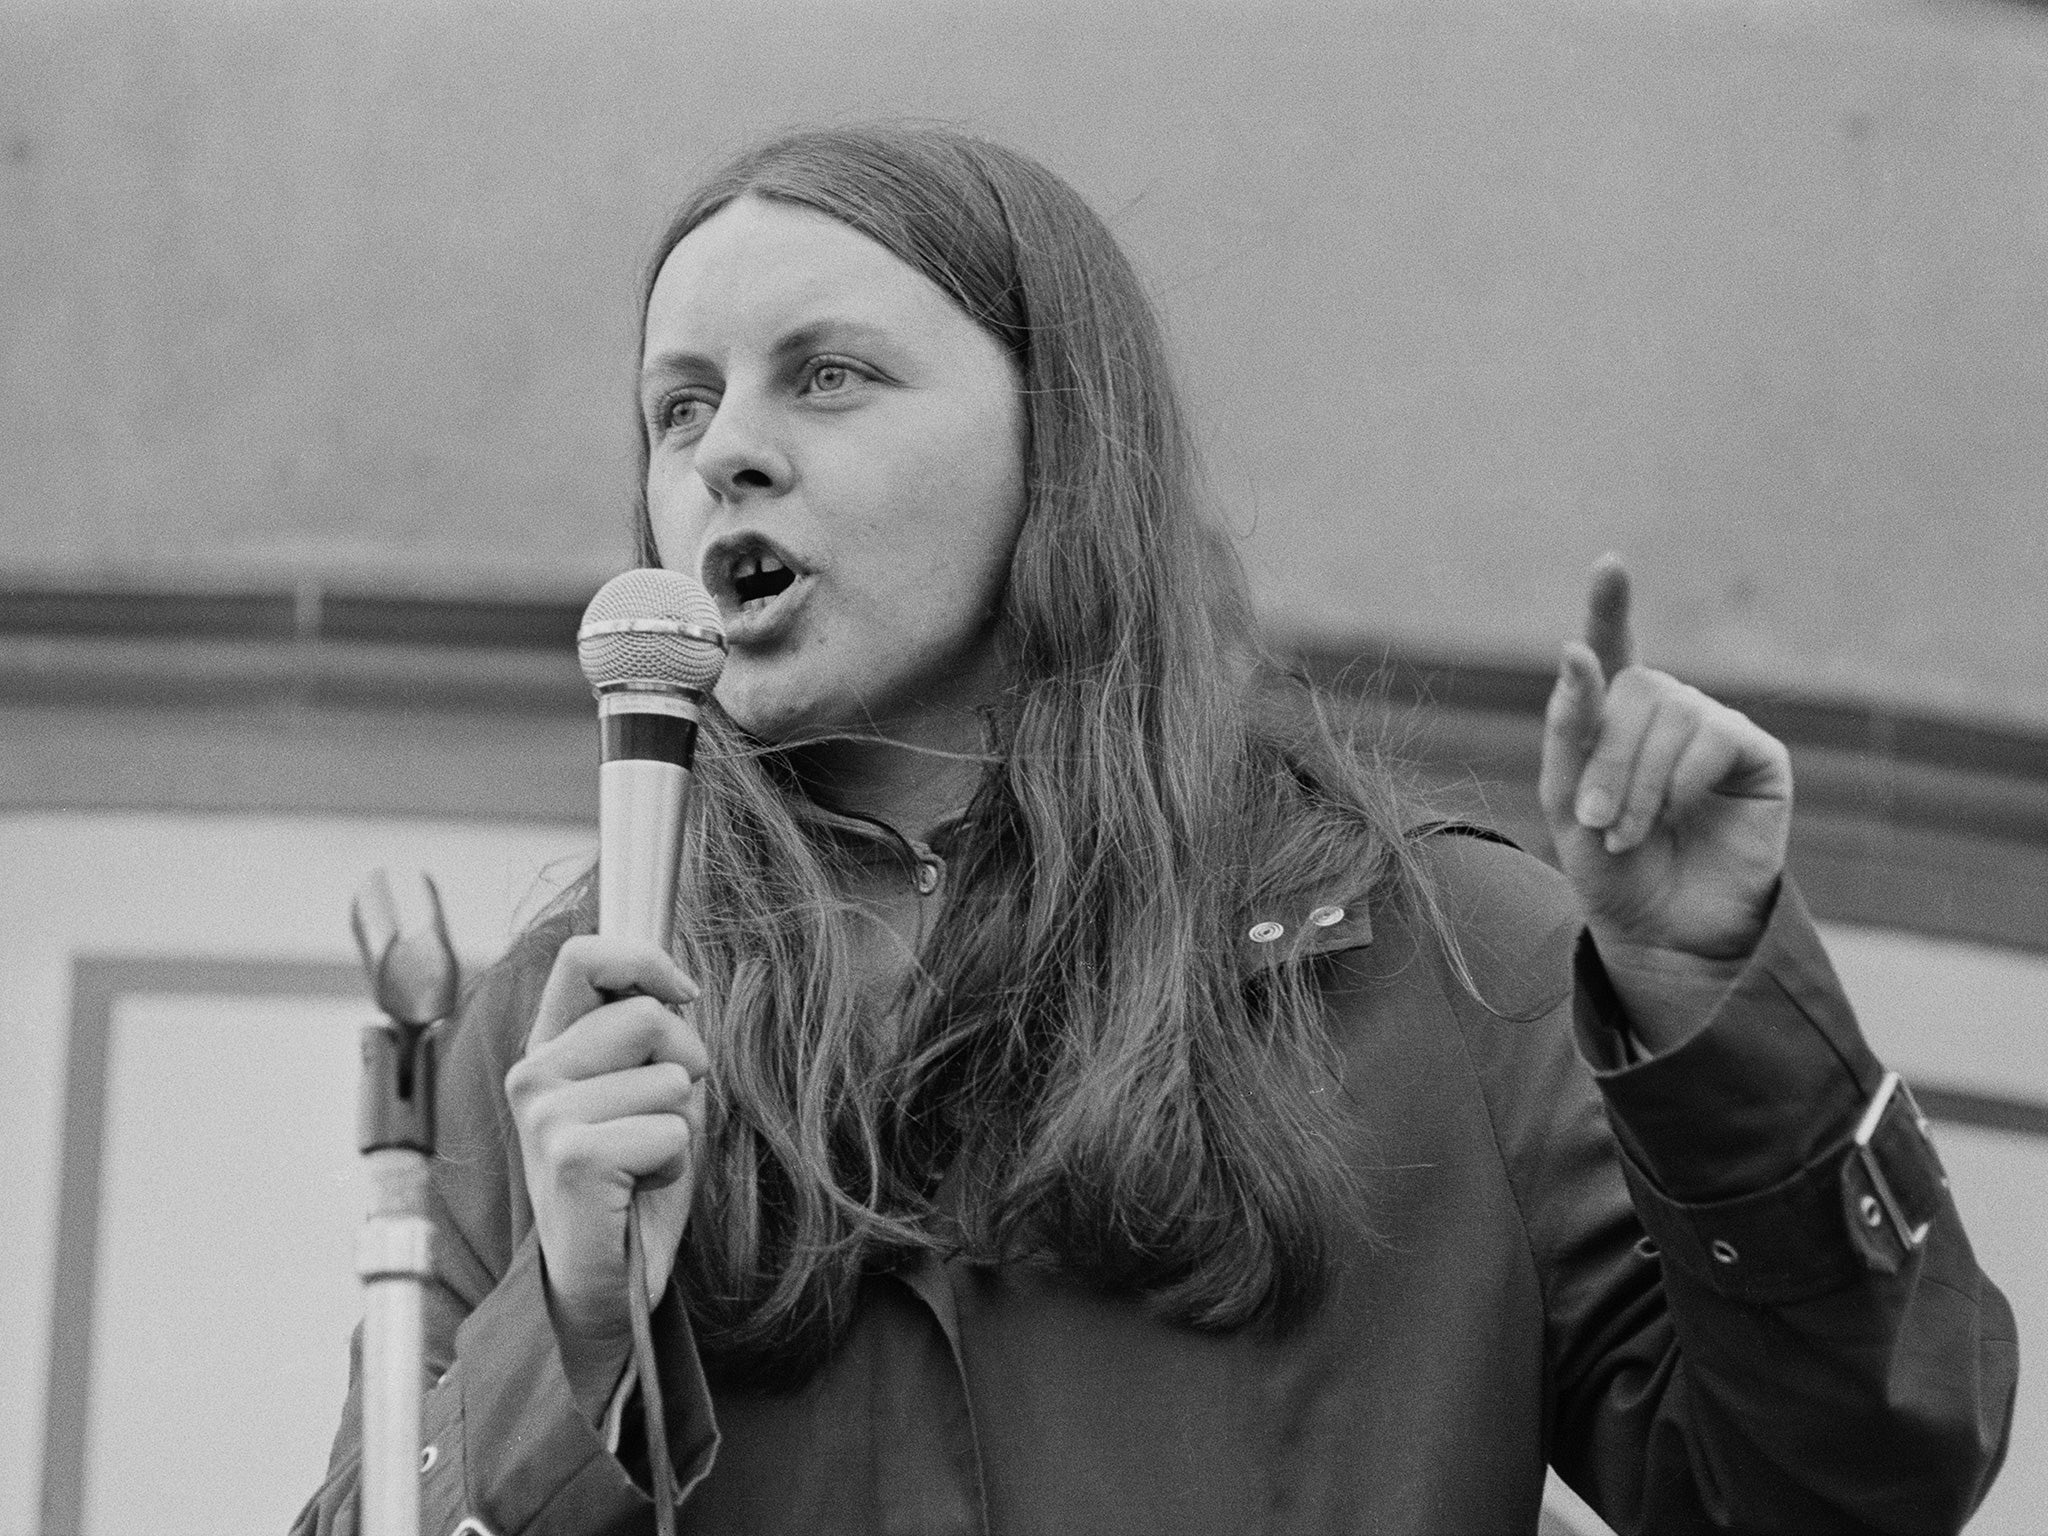 Bernadette Devlin speaking at a rally to protest against the British government's policy of internment in Northern Ireland in 1972